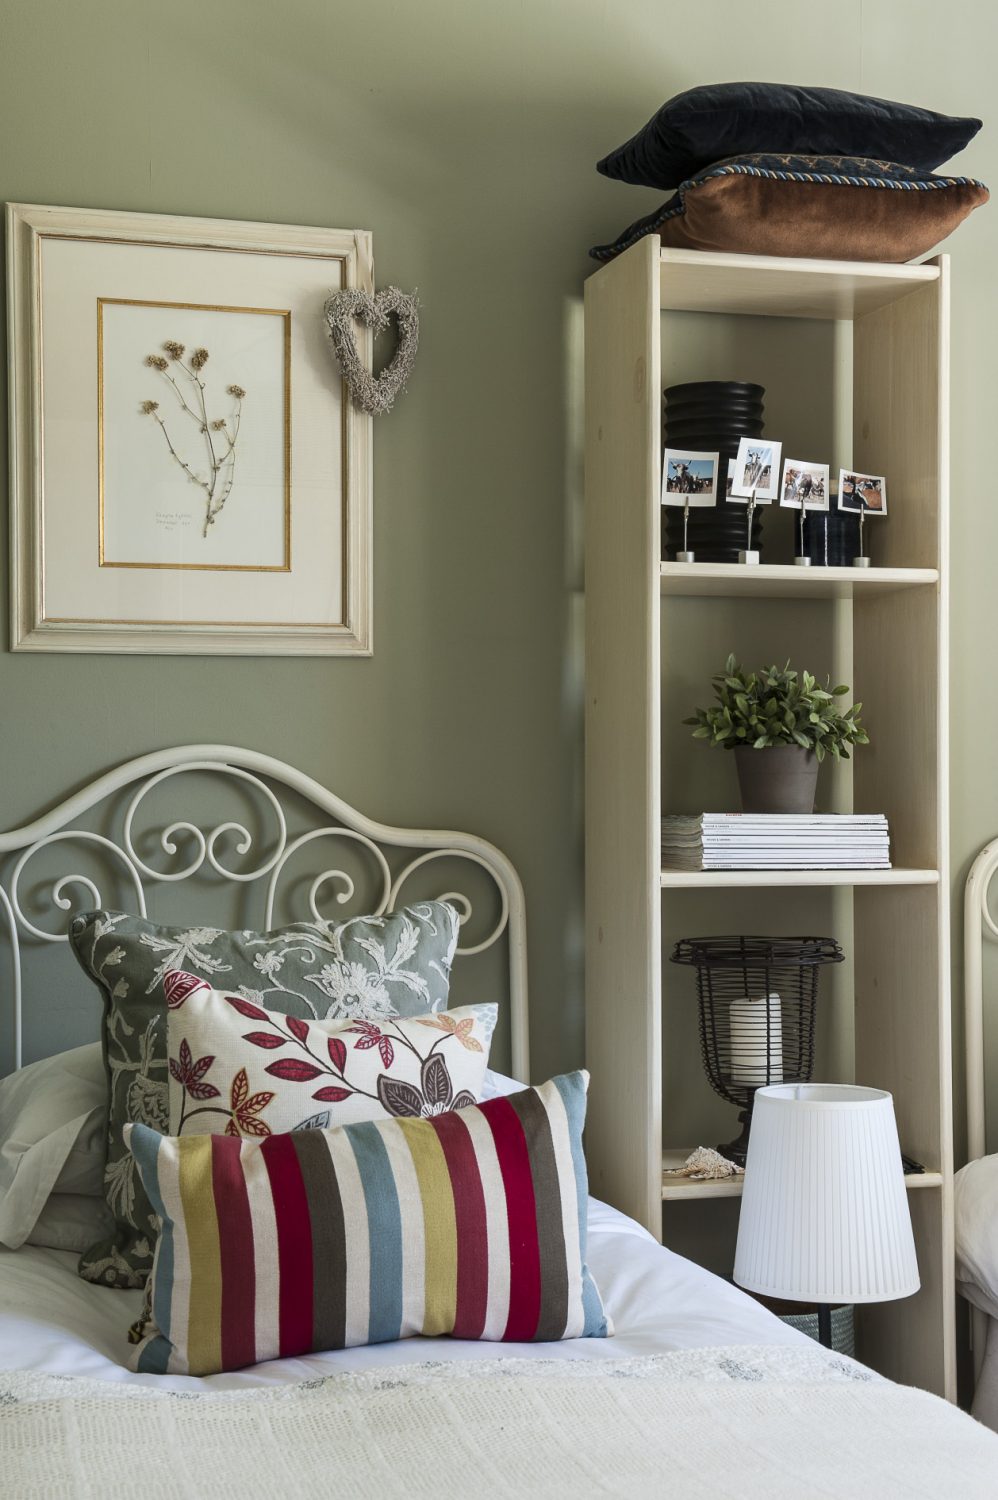 The bright second guest bedroom features delicate wrought-iron headpieces which are actually the matching head and foot of a single bed found in a Tunbridge Wells antique shop